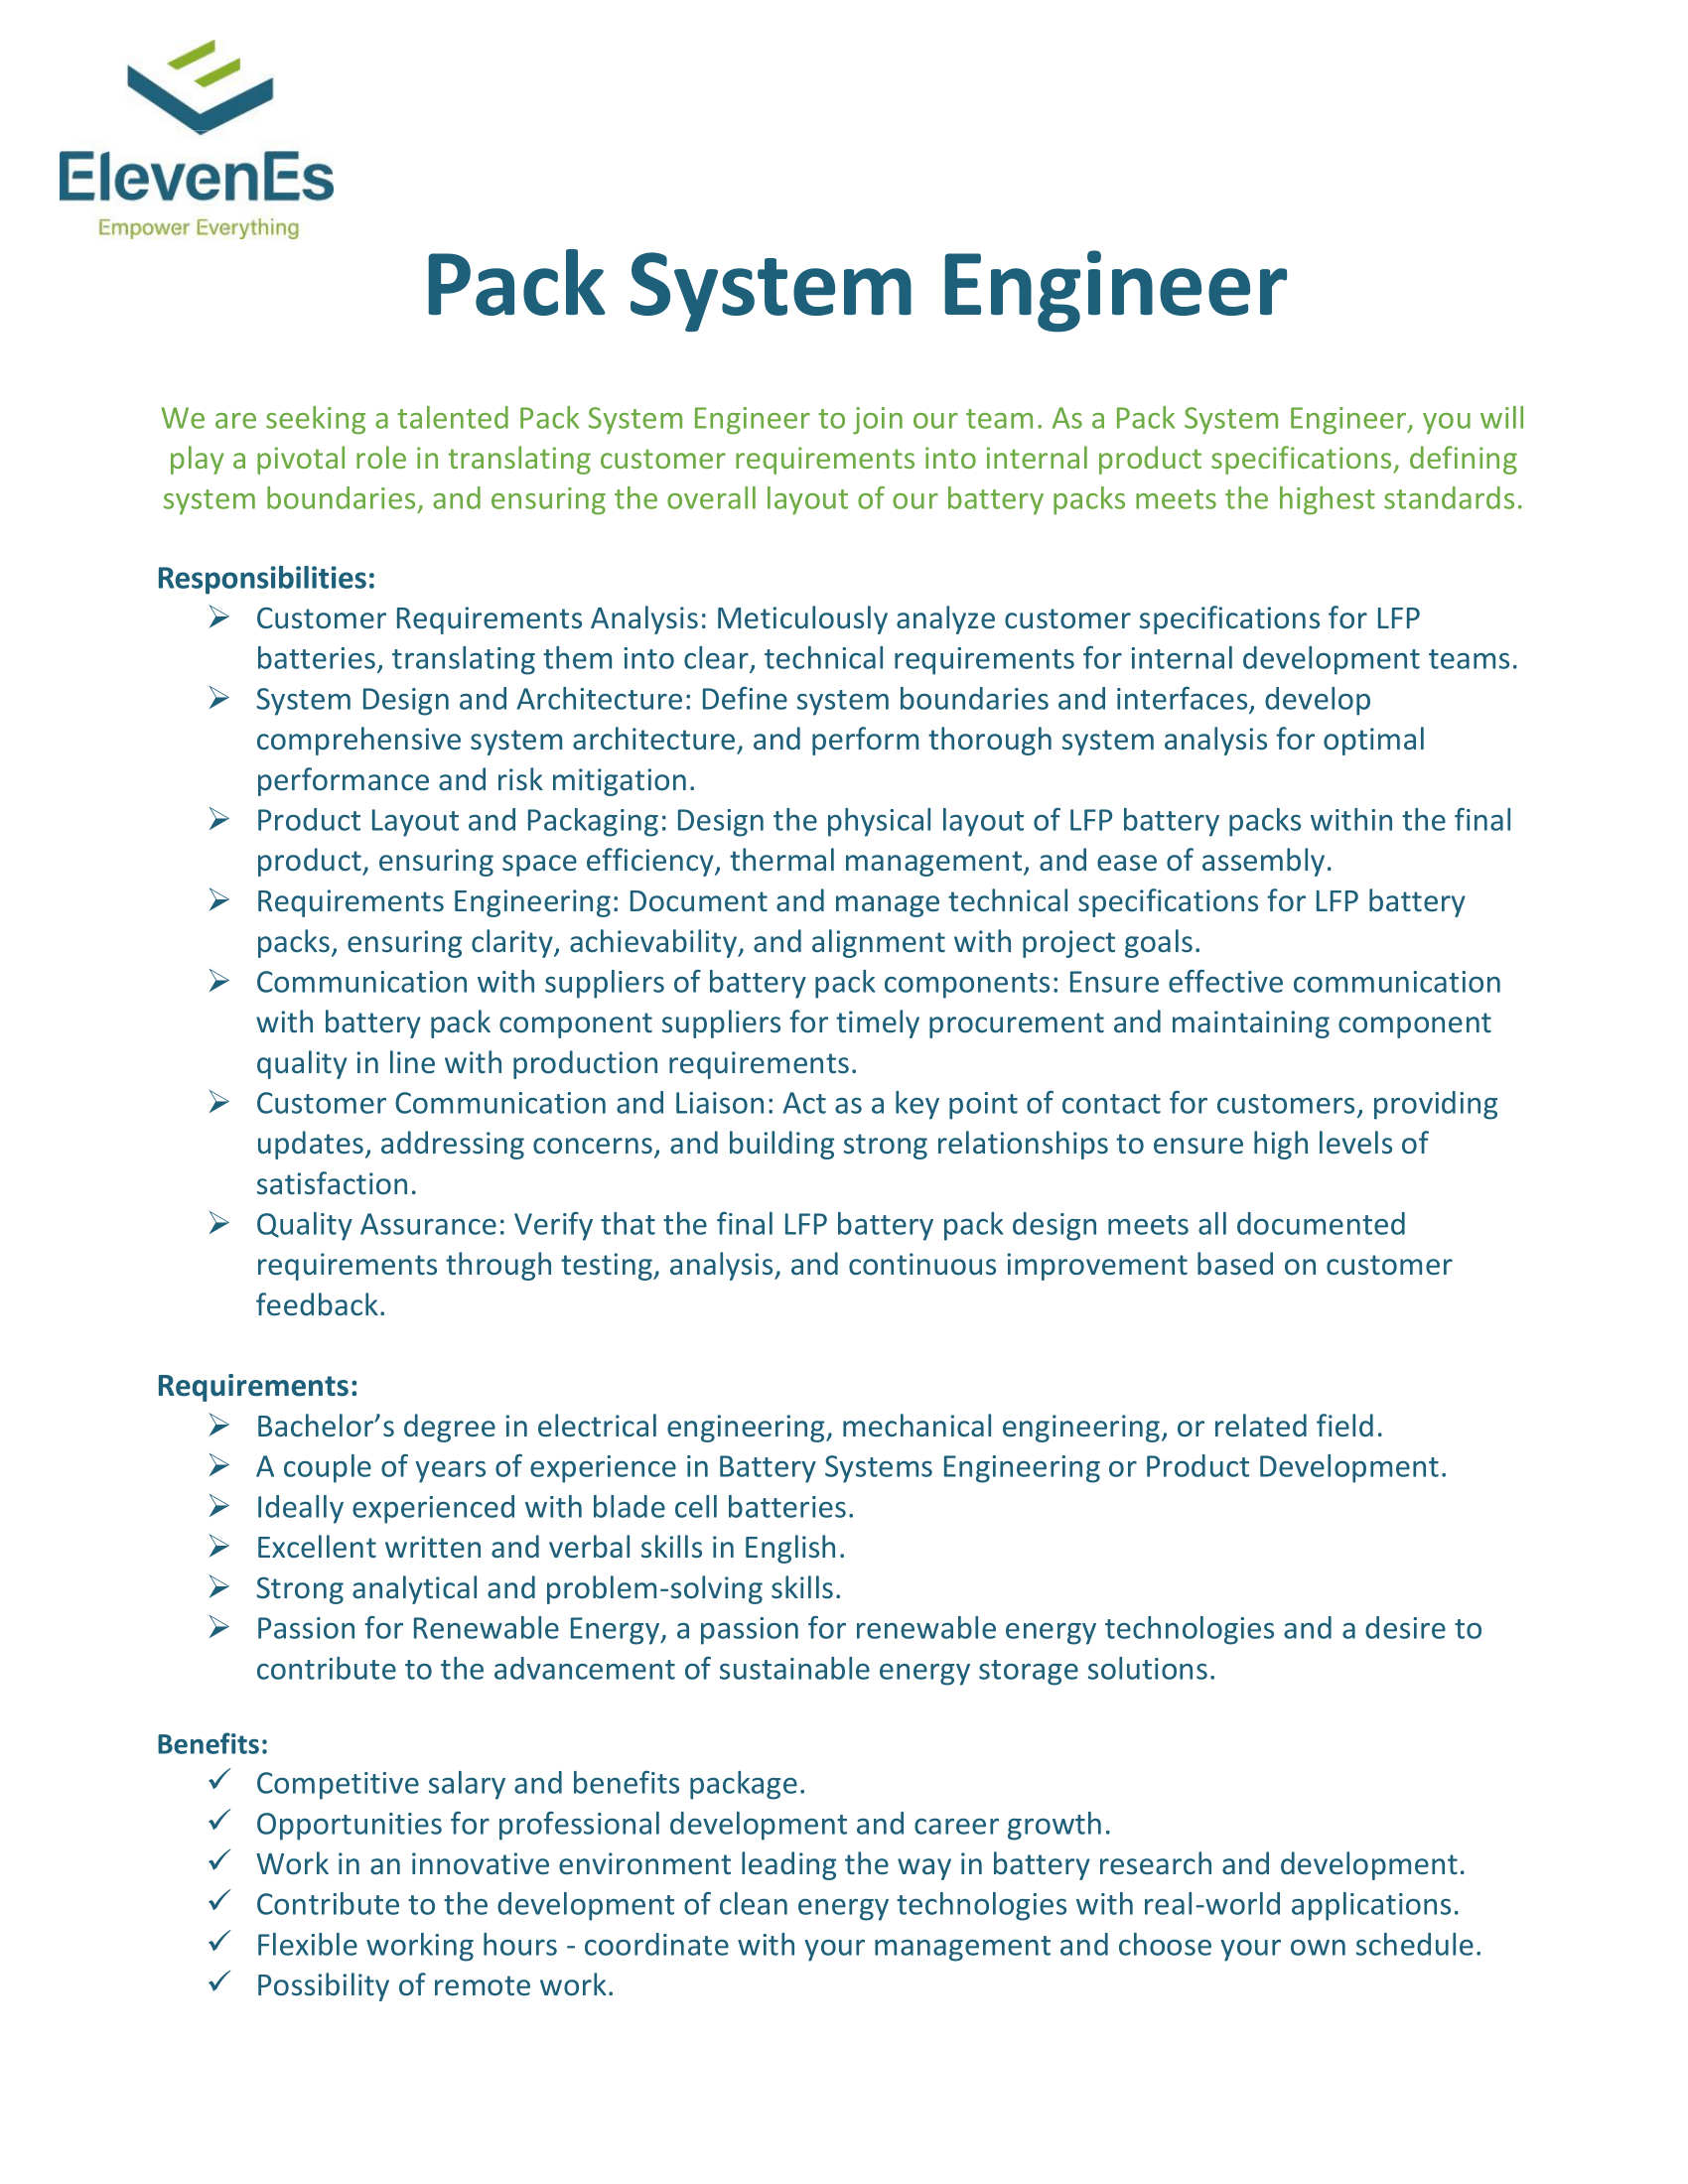 Pack-System-Engineer